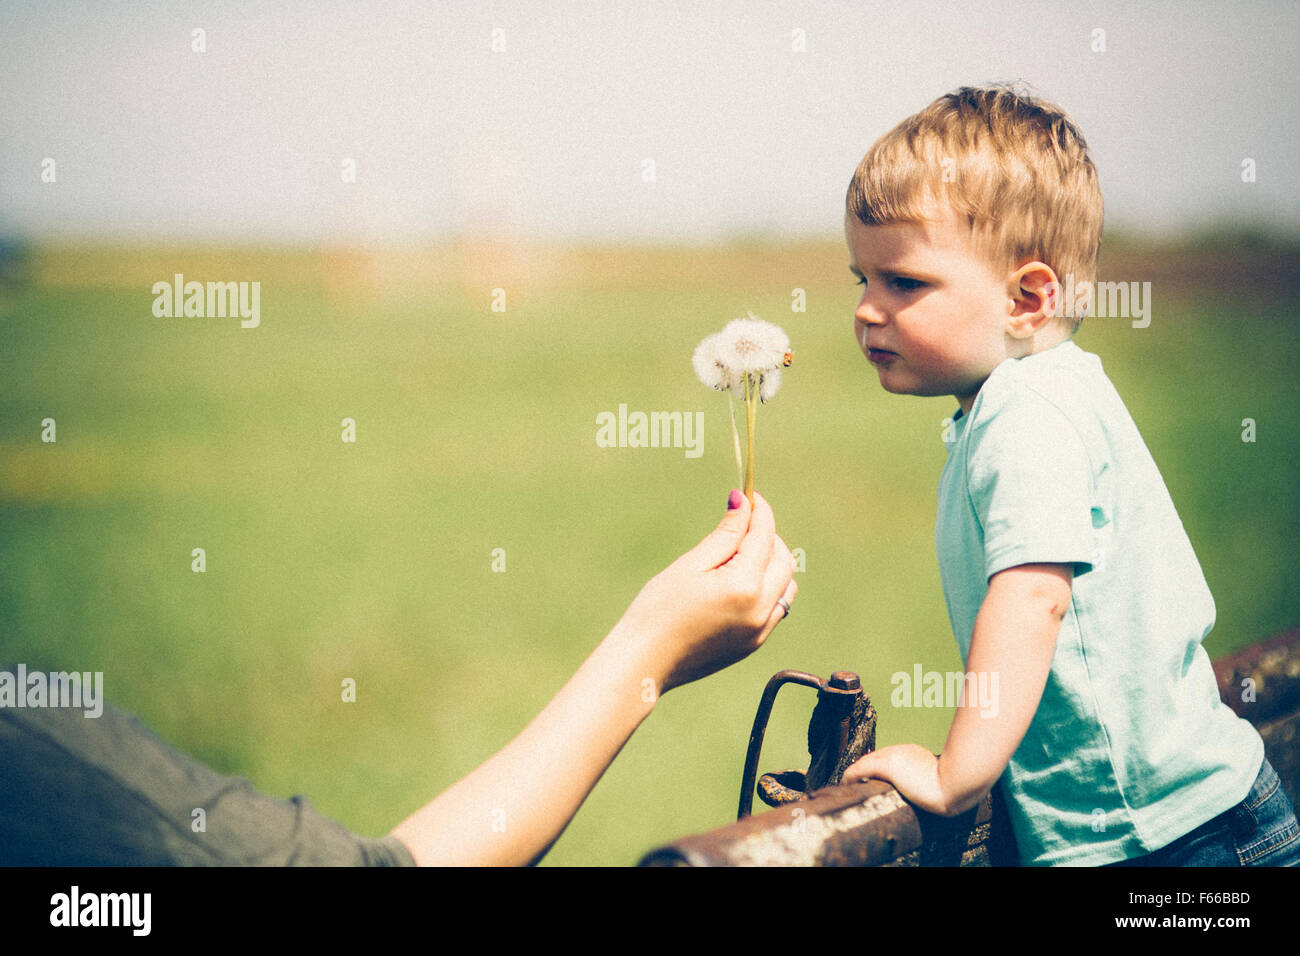 Parent holding a dandelion to be blown by child Stock Photo